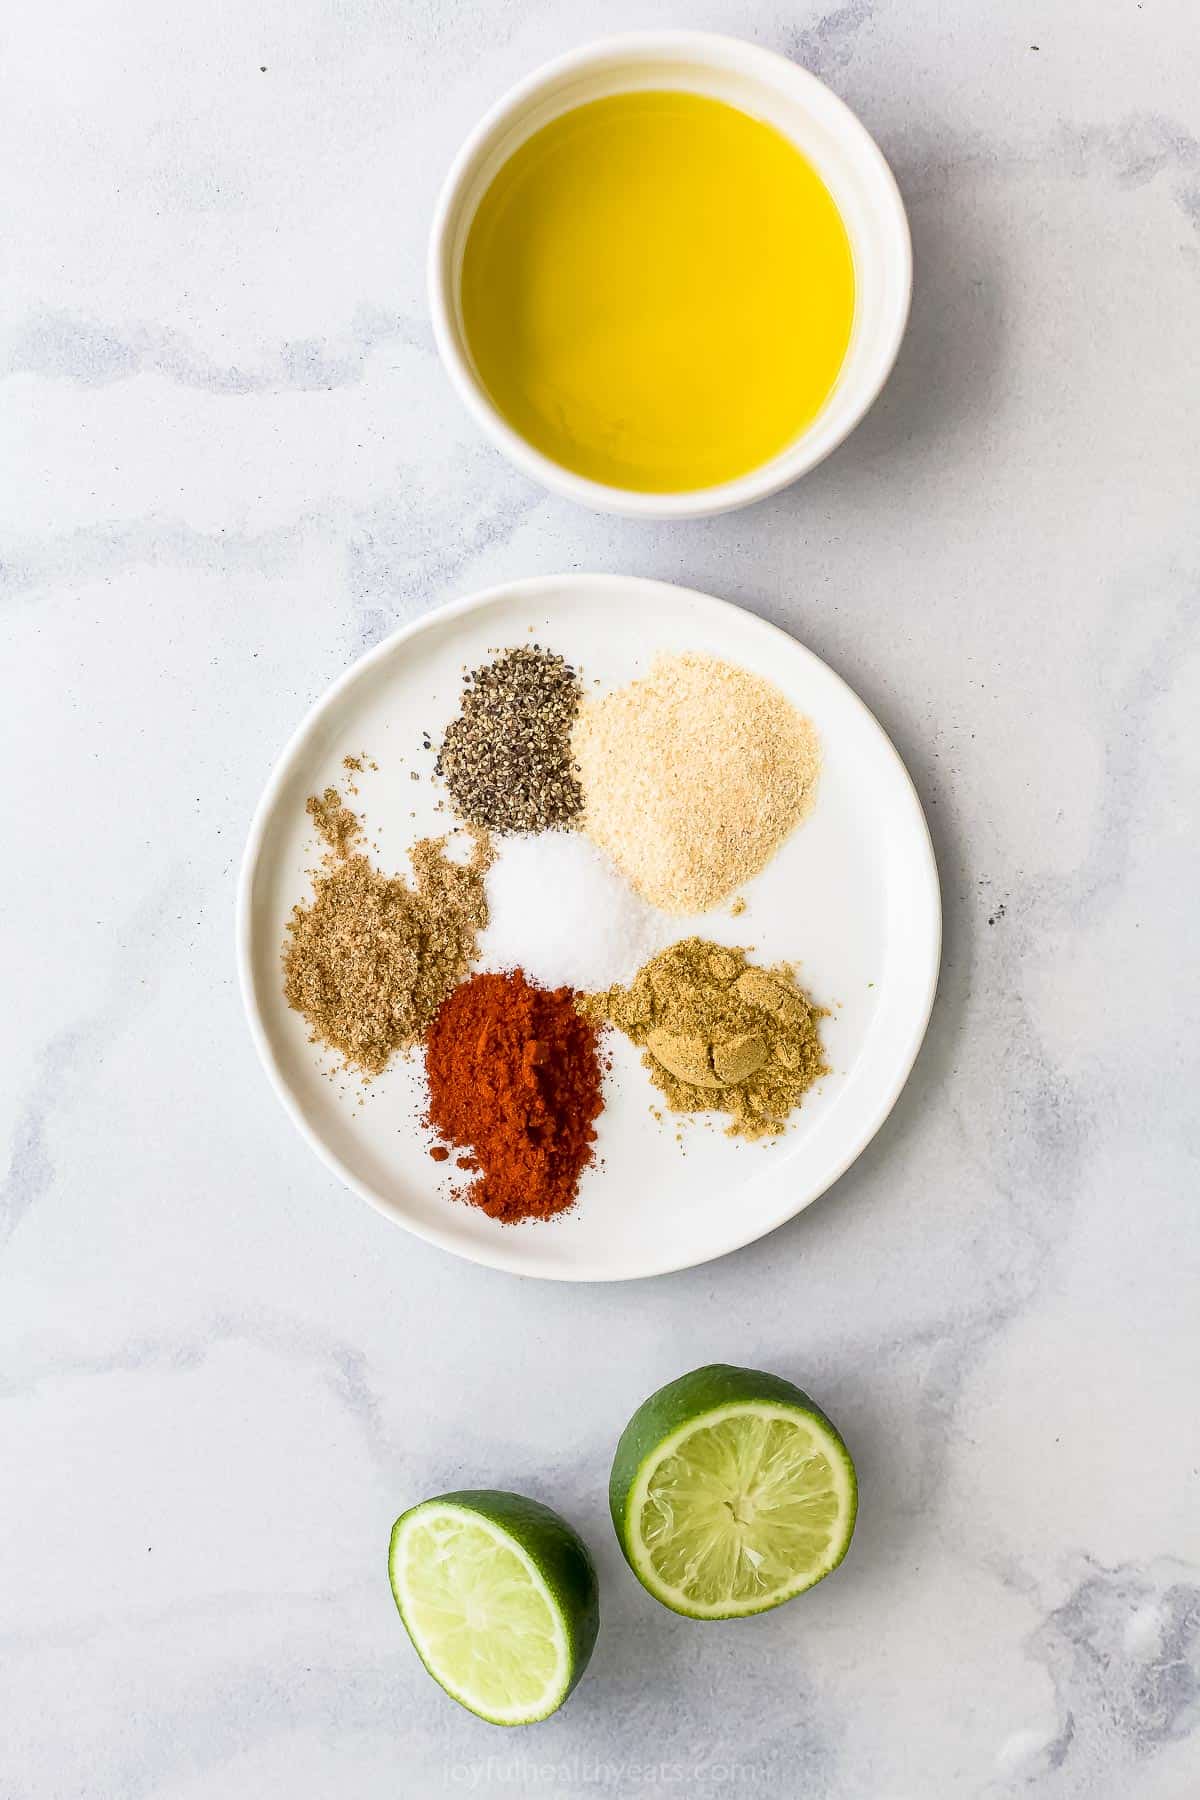 A fresh lime, a bowl of olive oil and all of the spice rub seasonings on a kitchen countertop